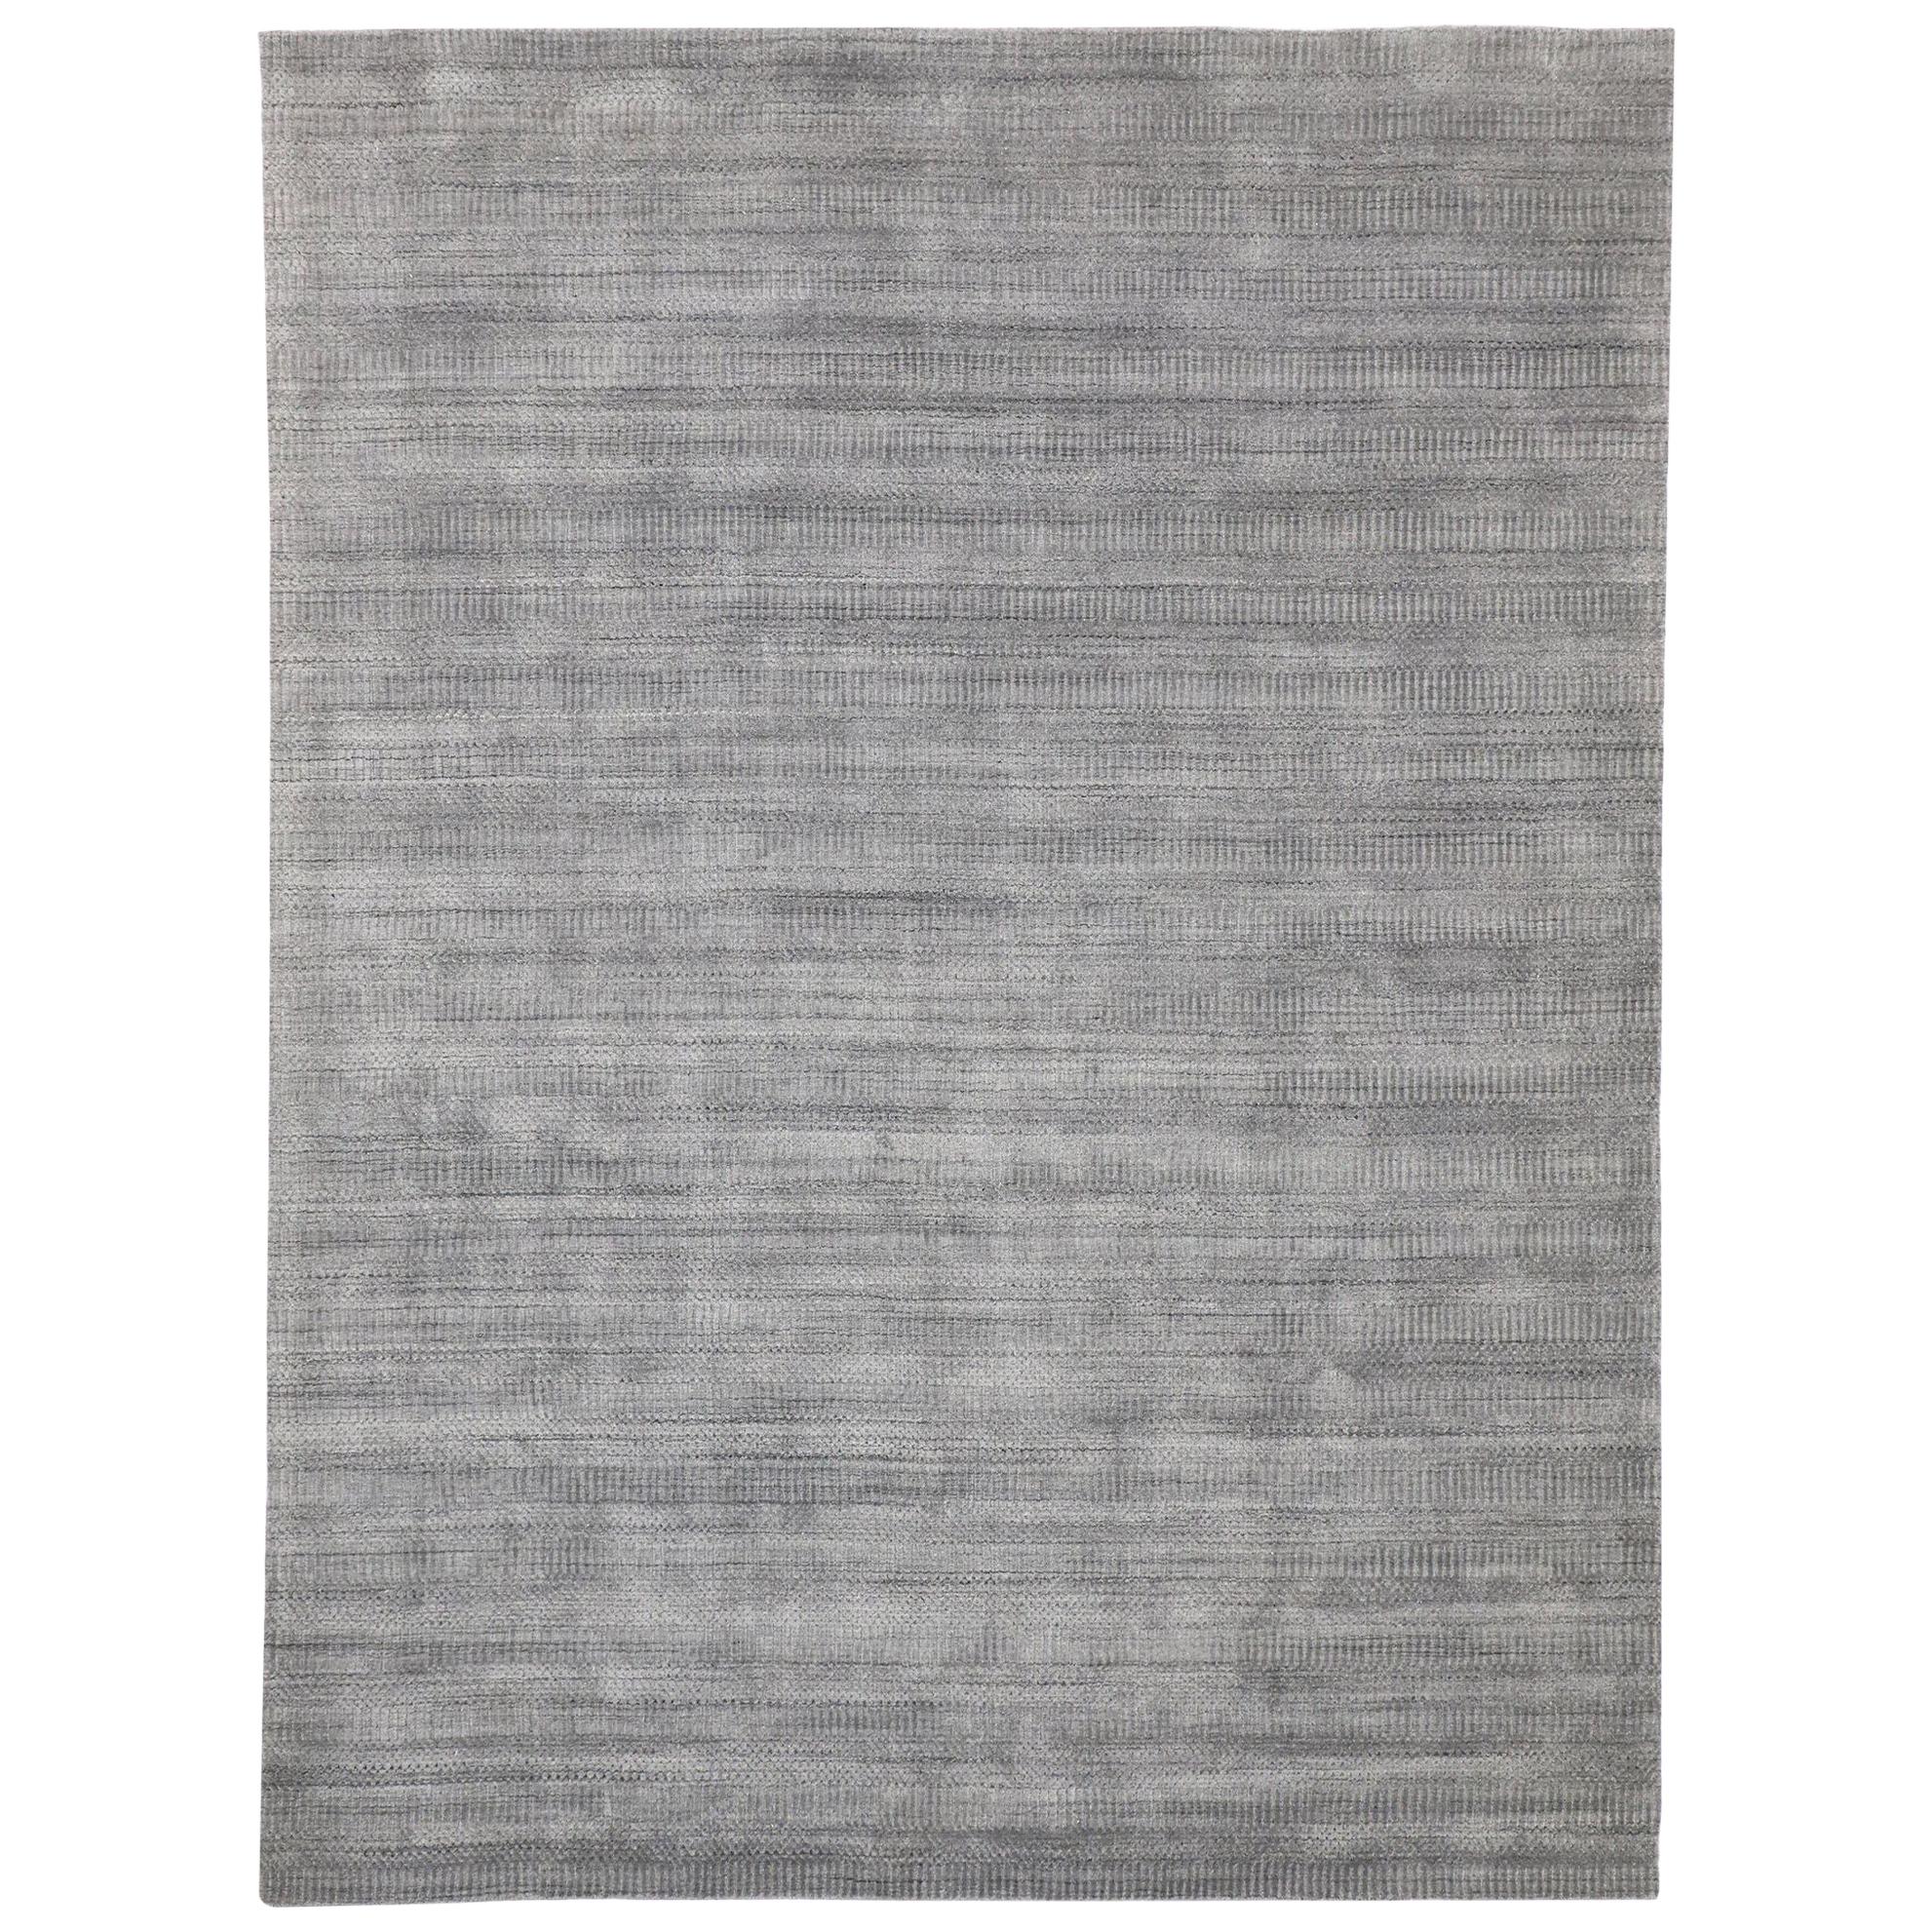 New Transitional Gray Area Rug with Modern Scandinavian Danish Style  For Sale